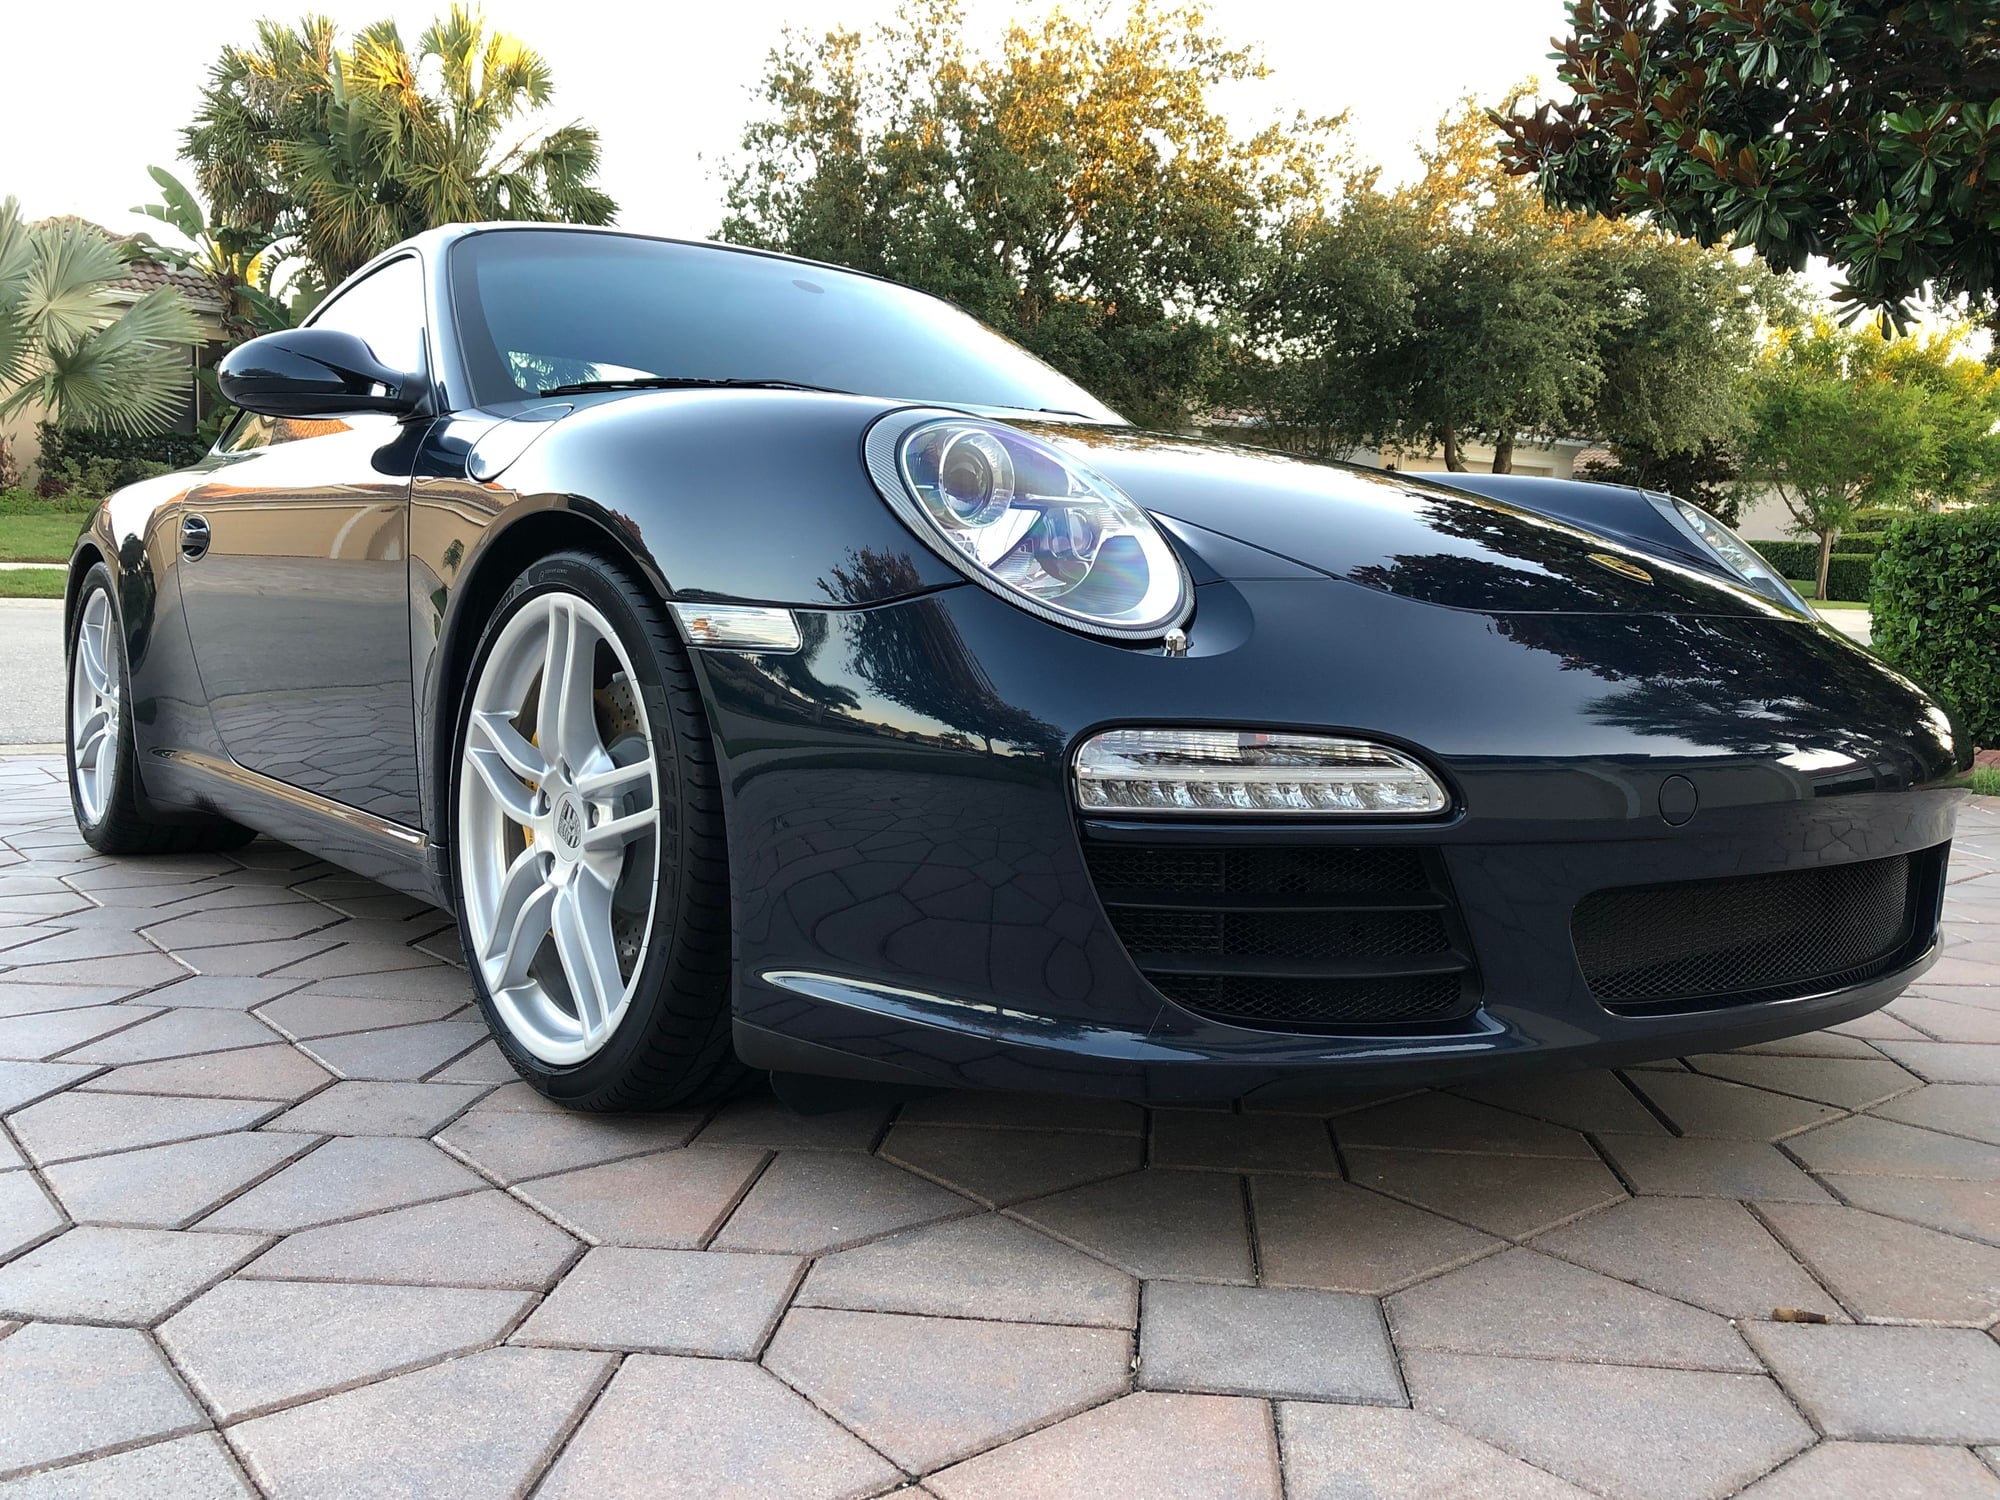 2011 Porsche 911 - 2011 997.2 Carrera S - Used - VIN WP0AB2A96BS721065 - 66,181 Miles - 6 cyl - 2WD - Manual - Coupe - Blue - Bradenton, FL 34202, United States